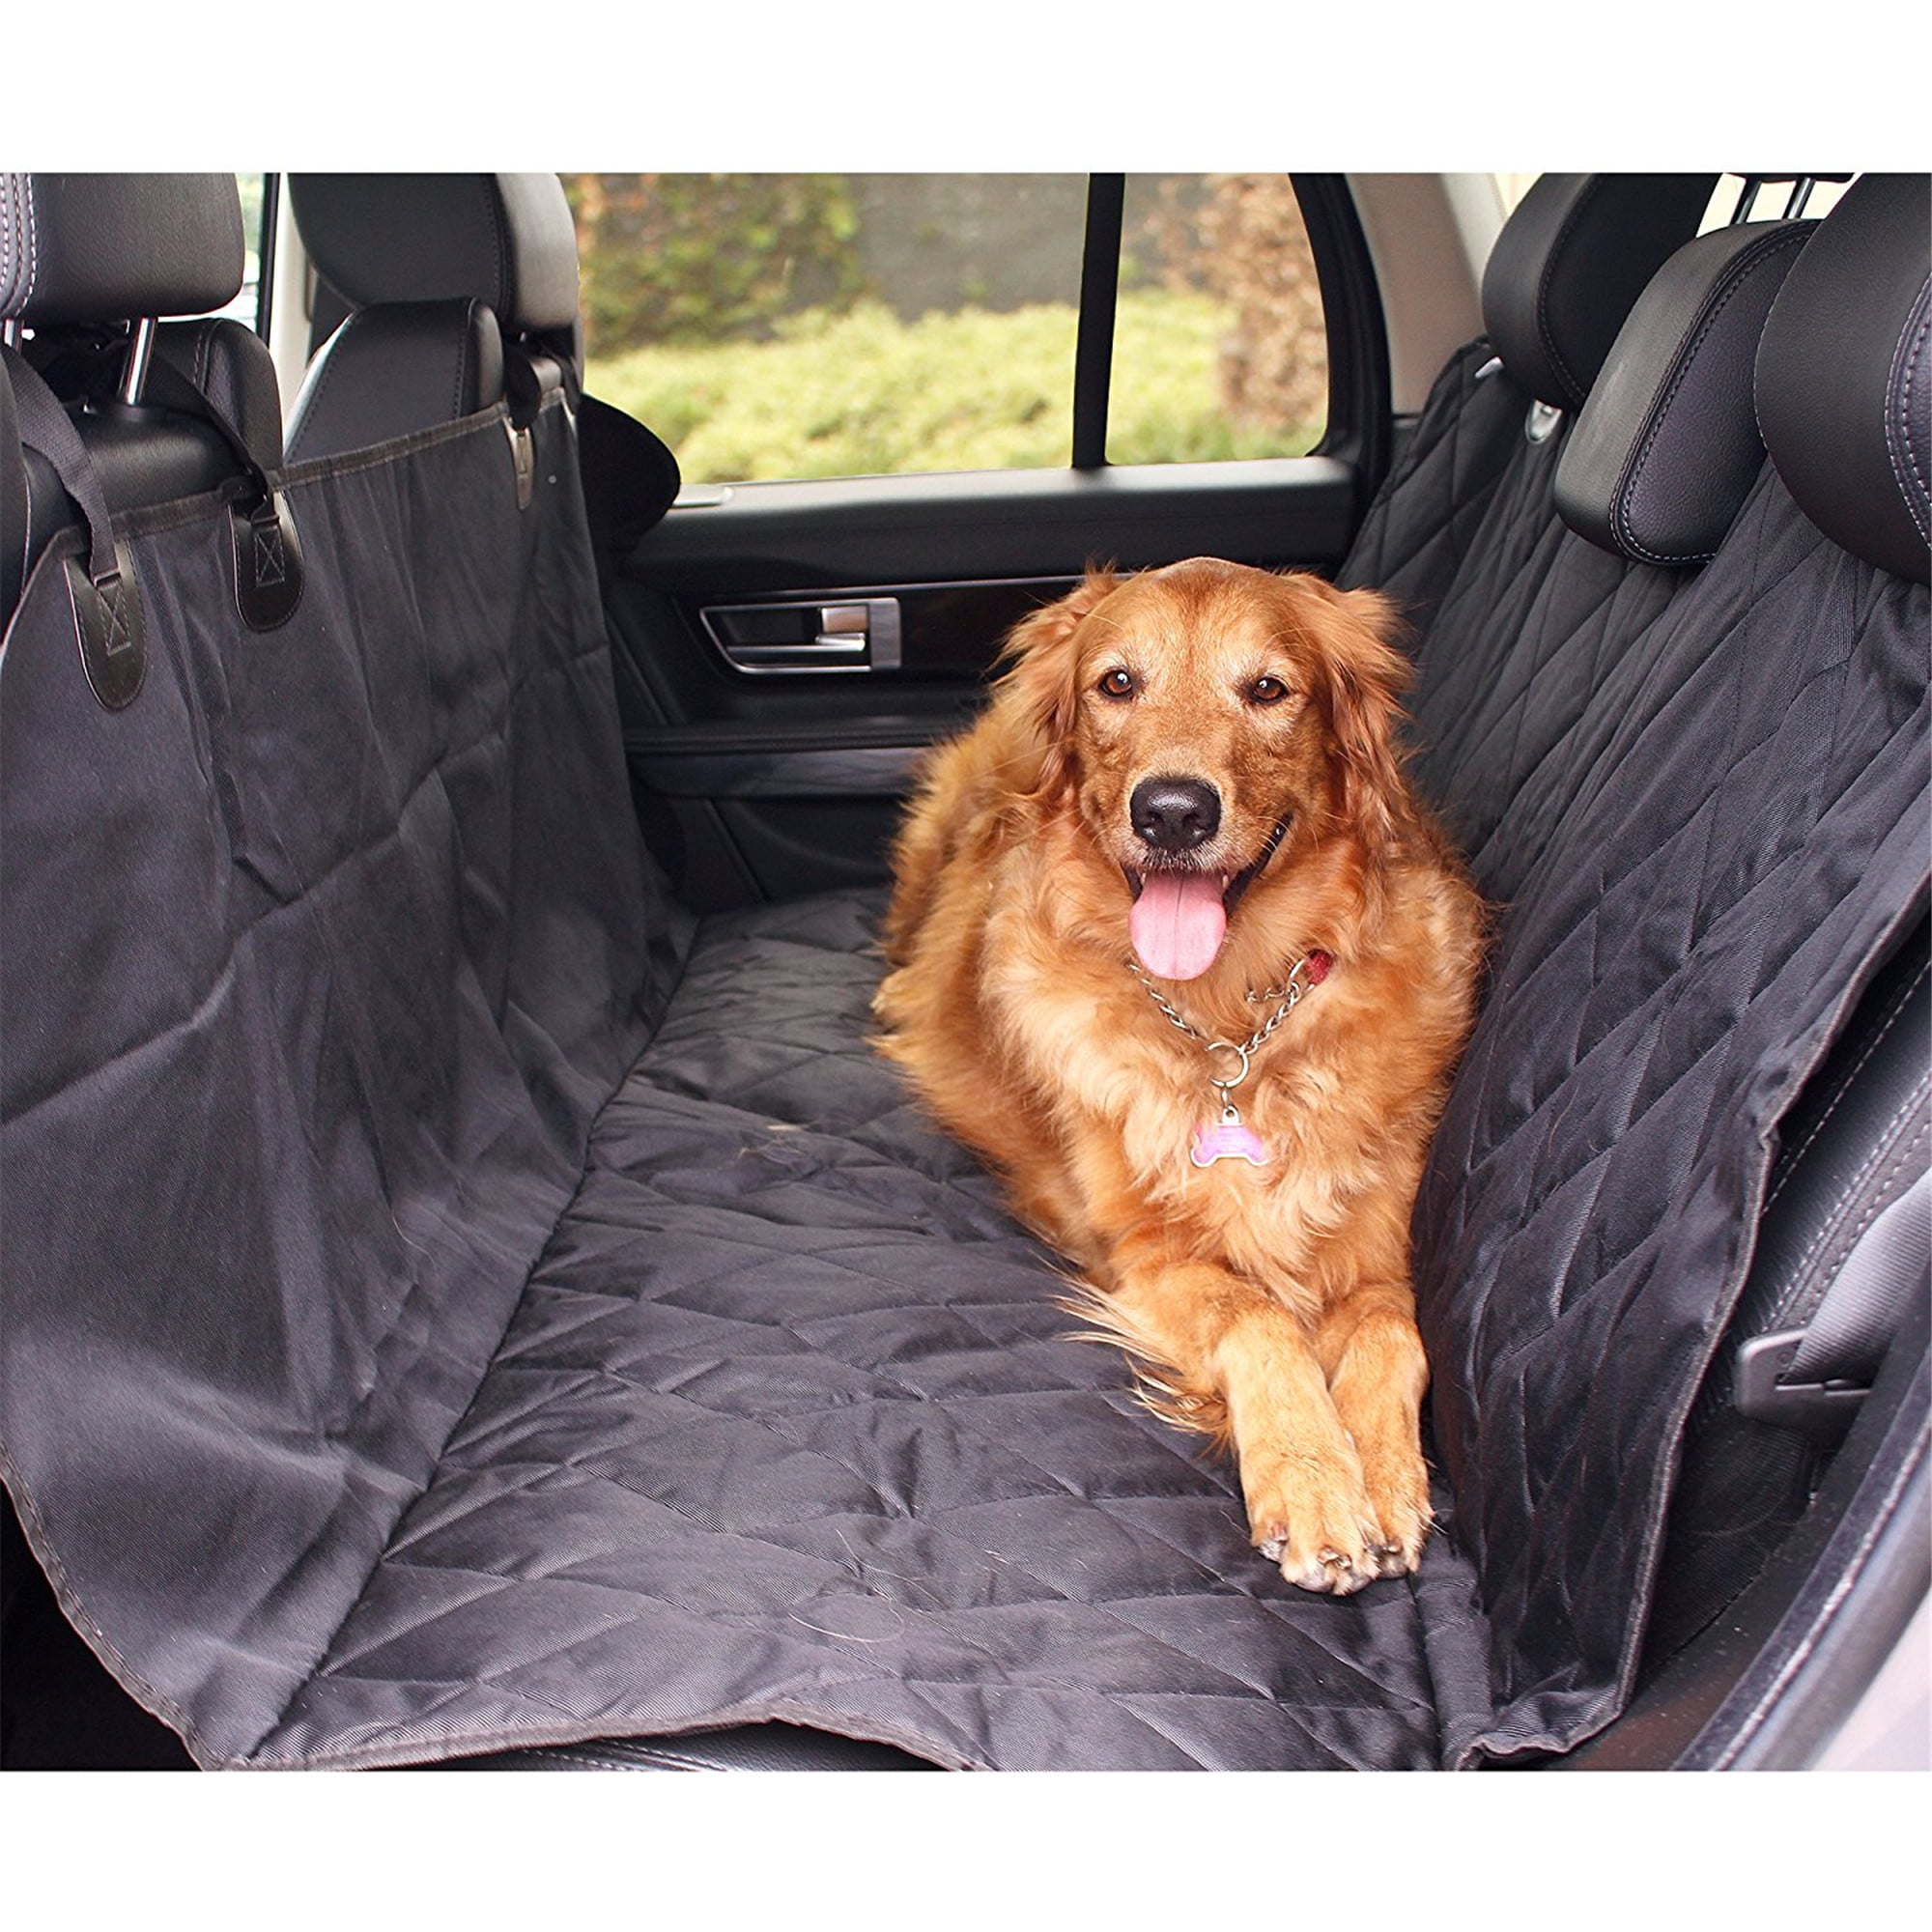 Dog Car Seat Covers,Dog Seat Cover Pet Seat Cover for Cars, Trucks, and